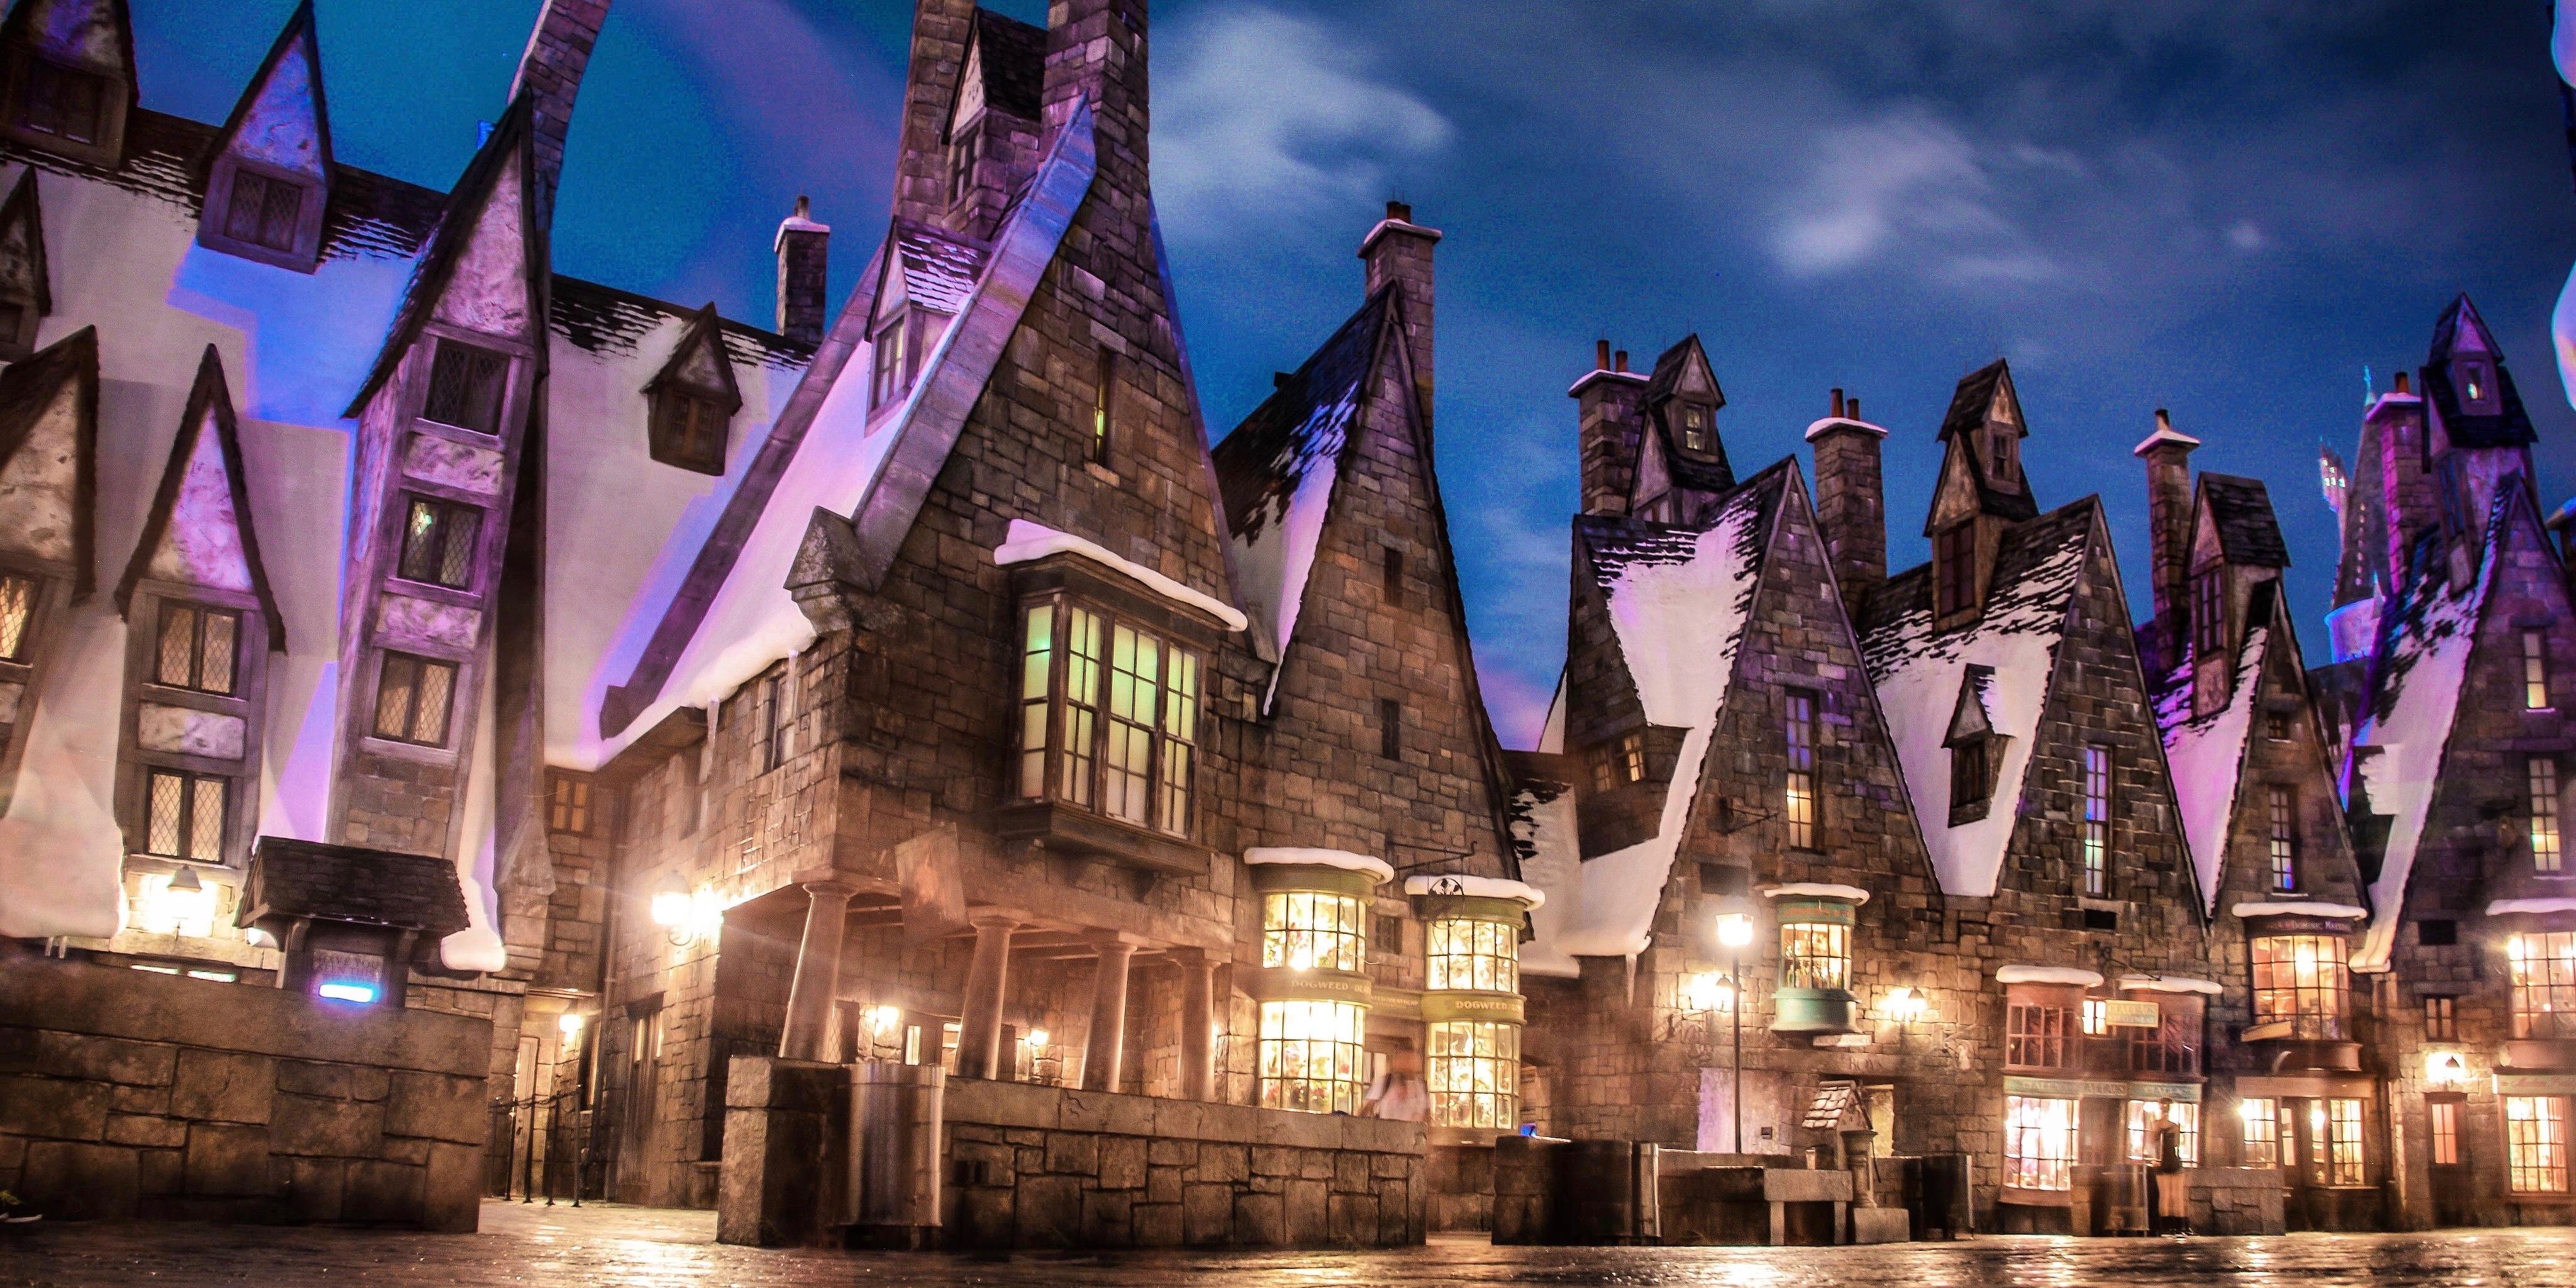 A view of Hogsmeade's cottages lit up at night in Harry Potter